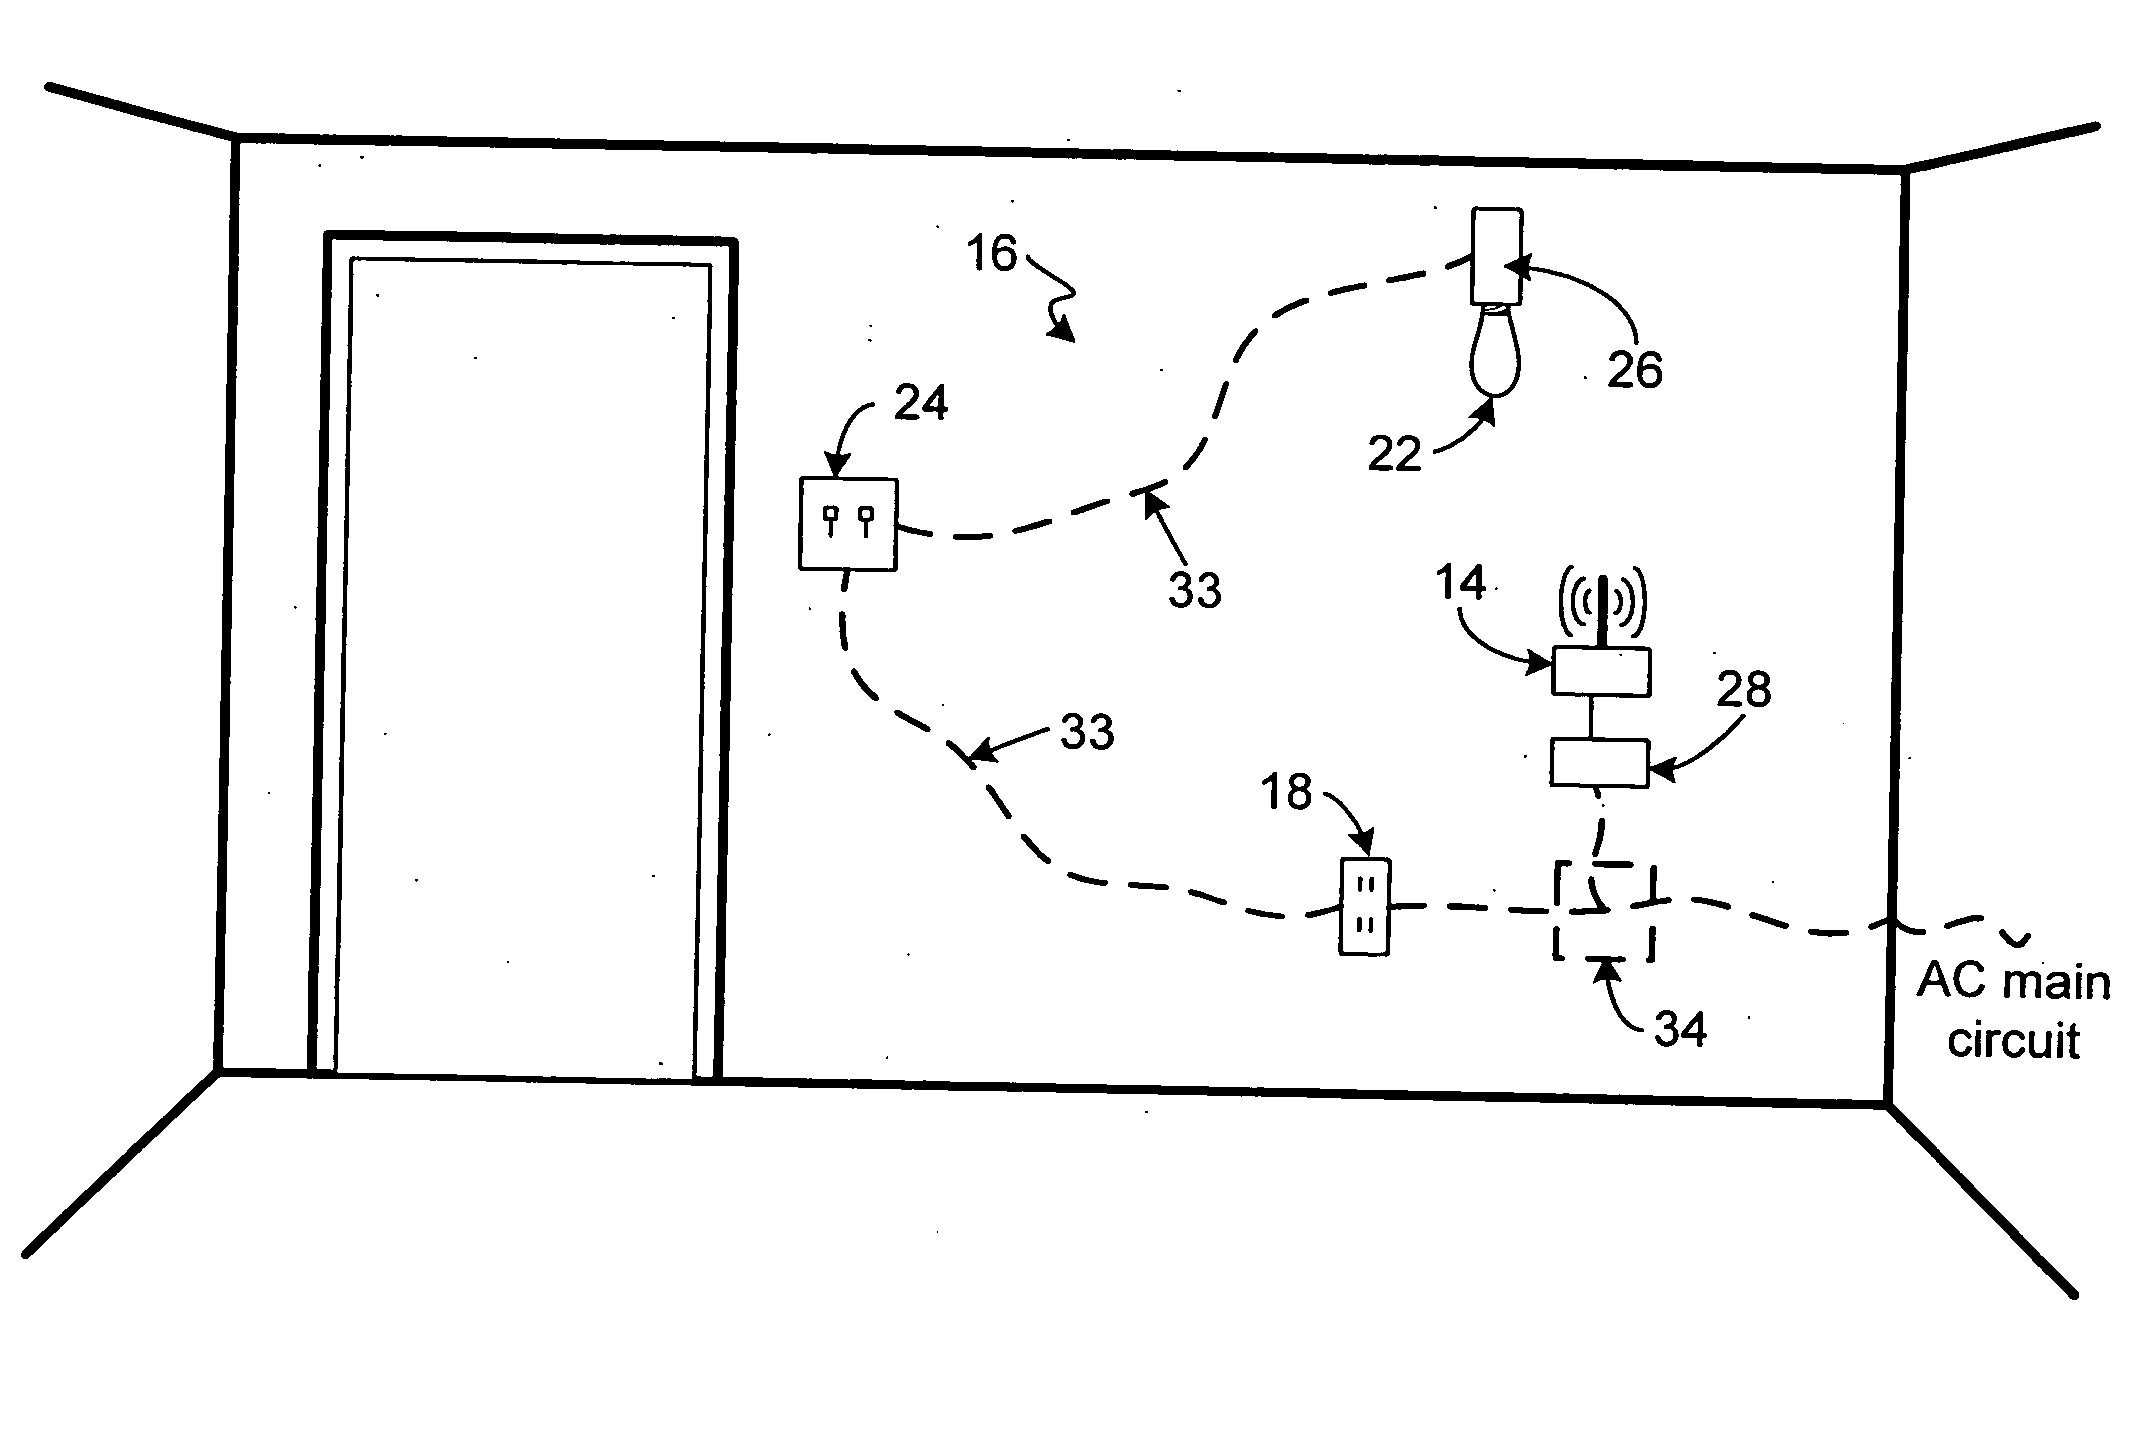 Implementation of an RF power transmitter and network